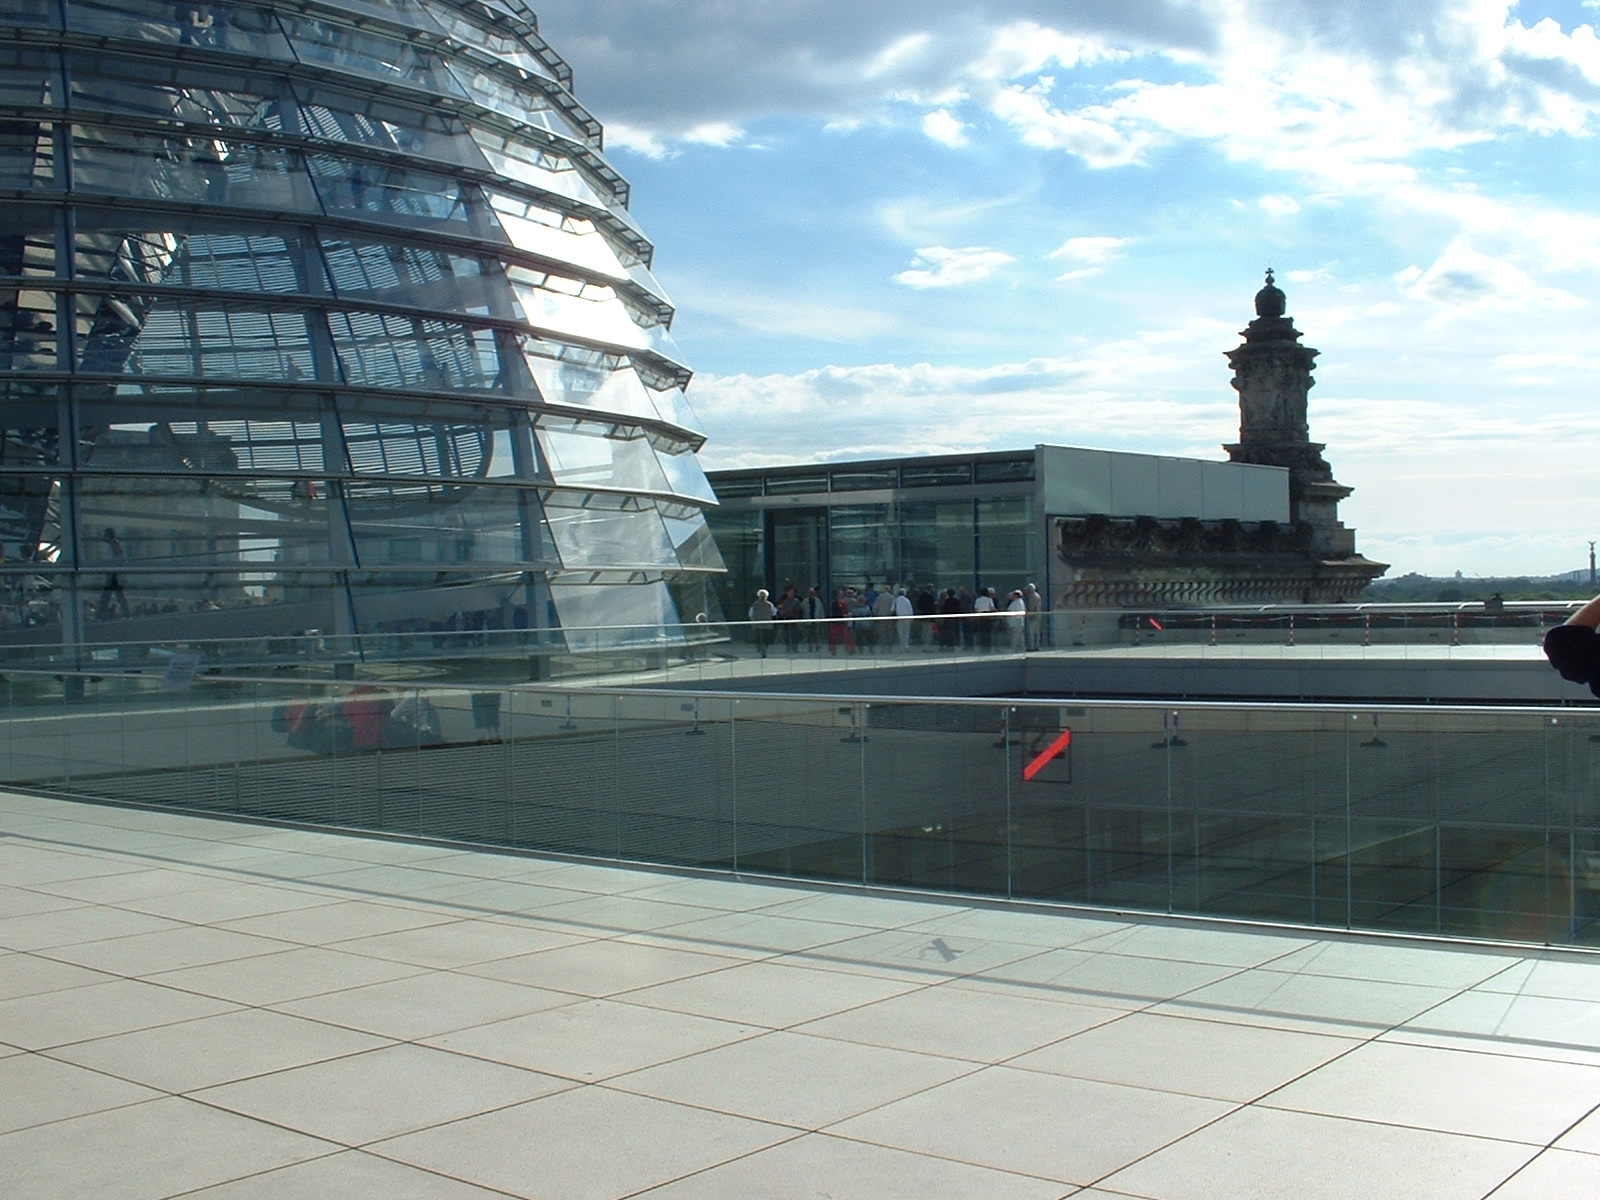 File:The roof of the Reichstag building in Berlin.jpg - Wikimedia ...